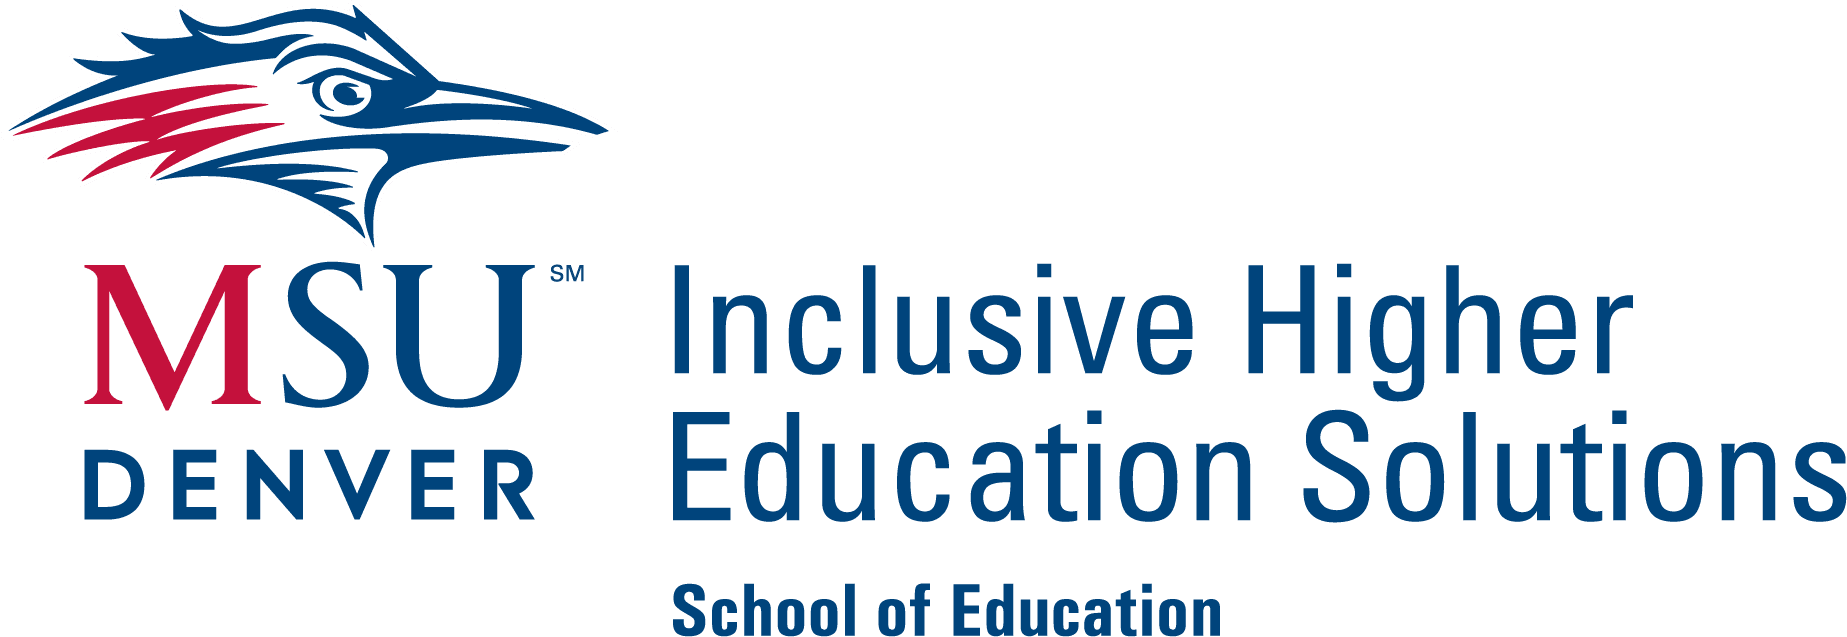 Inclusive Higher Education Solutions at Metropolitan State University of Denver